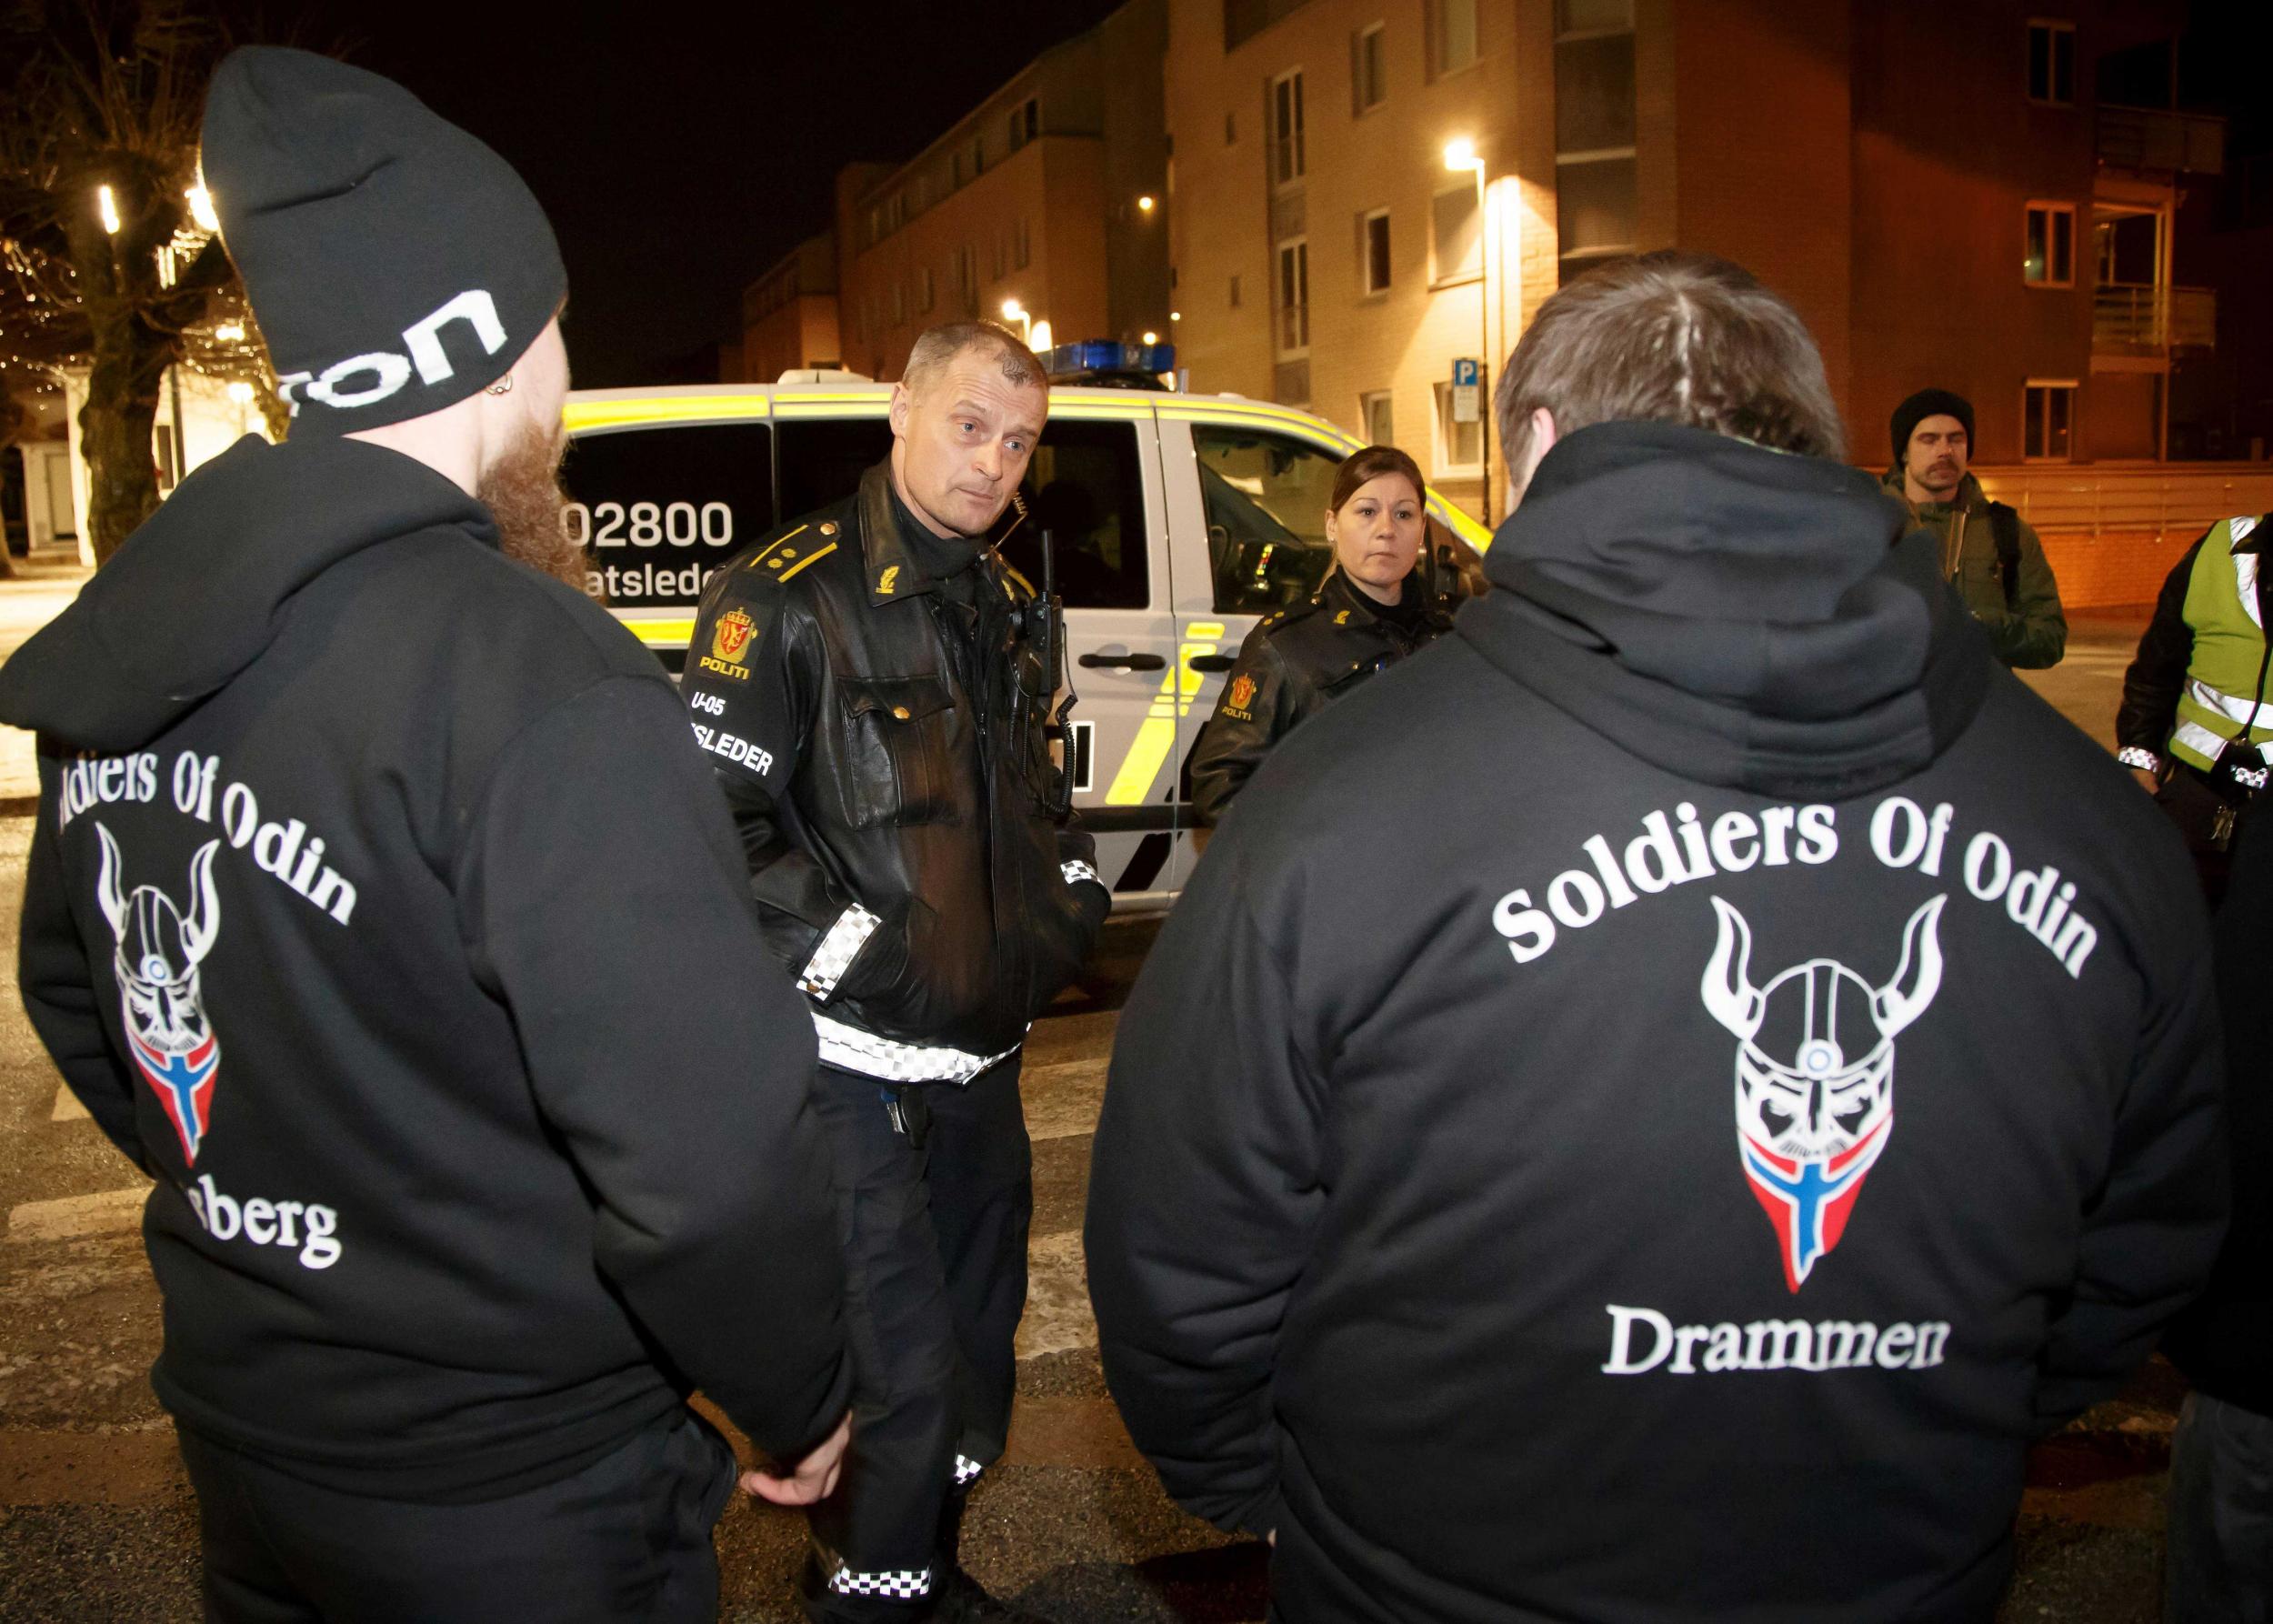 Named after the Norse god, the Soldiers of Odin have been seen patrolling the streets of some Norwegian cities